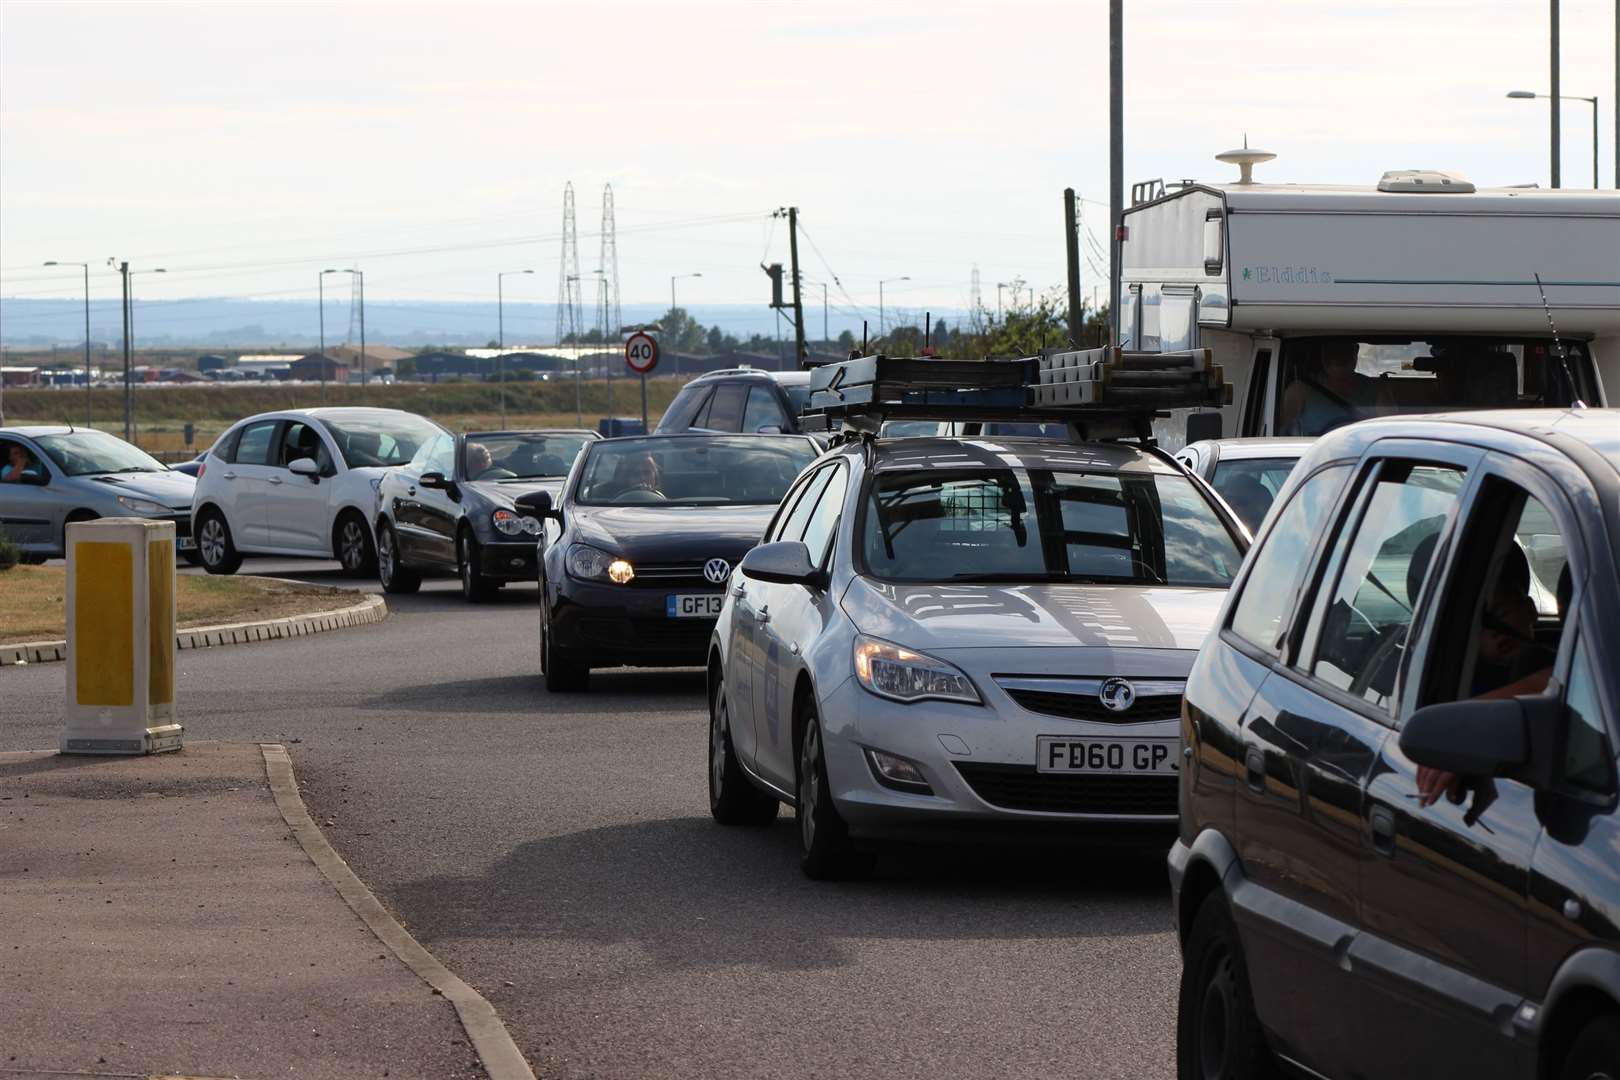 Traffic at Cowstead Corner roundabout, A249, Sheppey. File photo